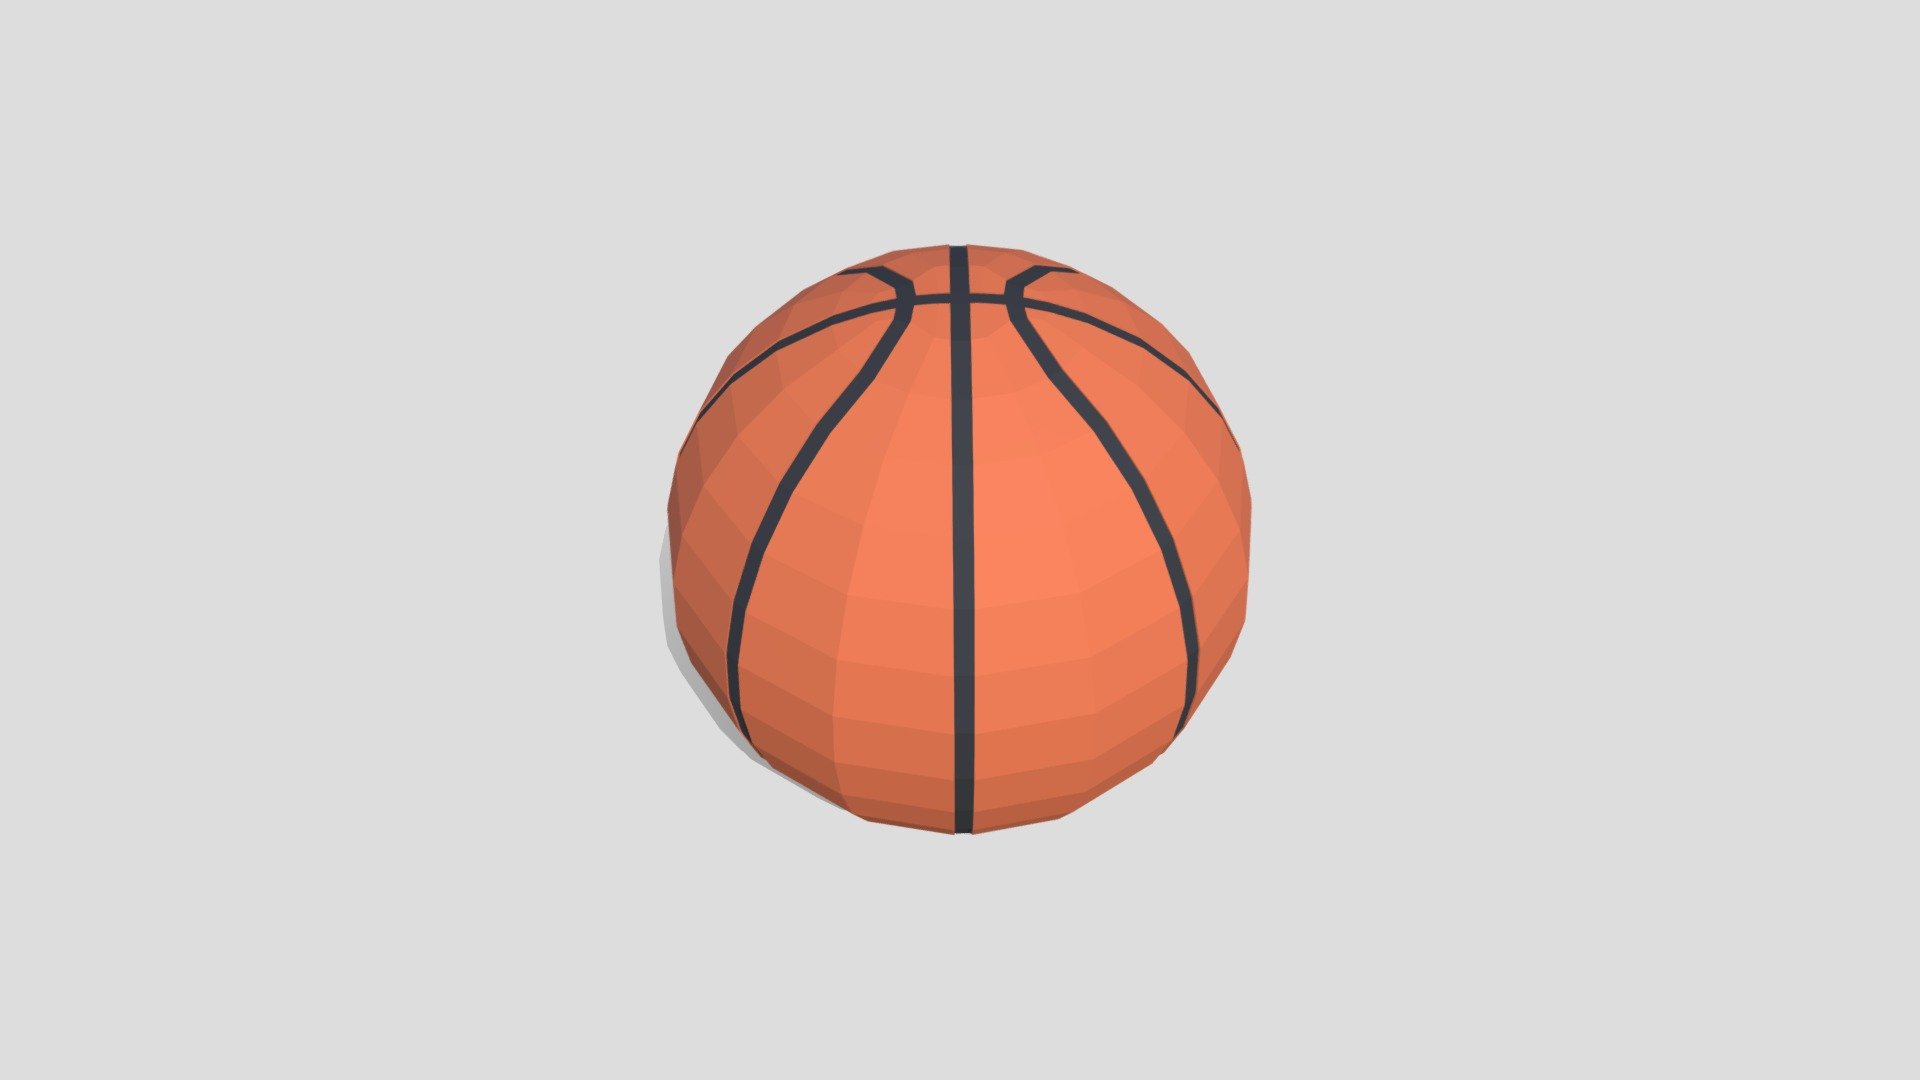 This is a 3d model of a basketball ball. The basketaball ball was modelled and prepared for cartoon style renderings, background, general CG visualization etc.

The 3d ball model is presented as a mesh with quads only.

Verts : 664 Faces: 662

This model have simple materials with diffuse colors.

No ring, maps and no UVW mapping is available.

The original file was created in blender. You will receive a 3DS, OBJ, FBX, blend, DAE, Stl.

All preview images were rendered with Blender Cycles. Product is ready to render out-of-the-box. Please note that the lights, cameras, and background is only included in the .blend file. The model is clean and alone in the other provided files, centred at origin and has real-world scale 3d model